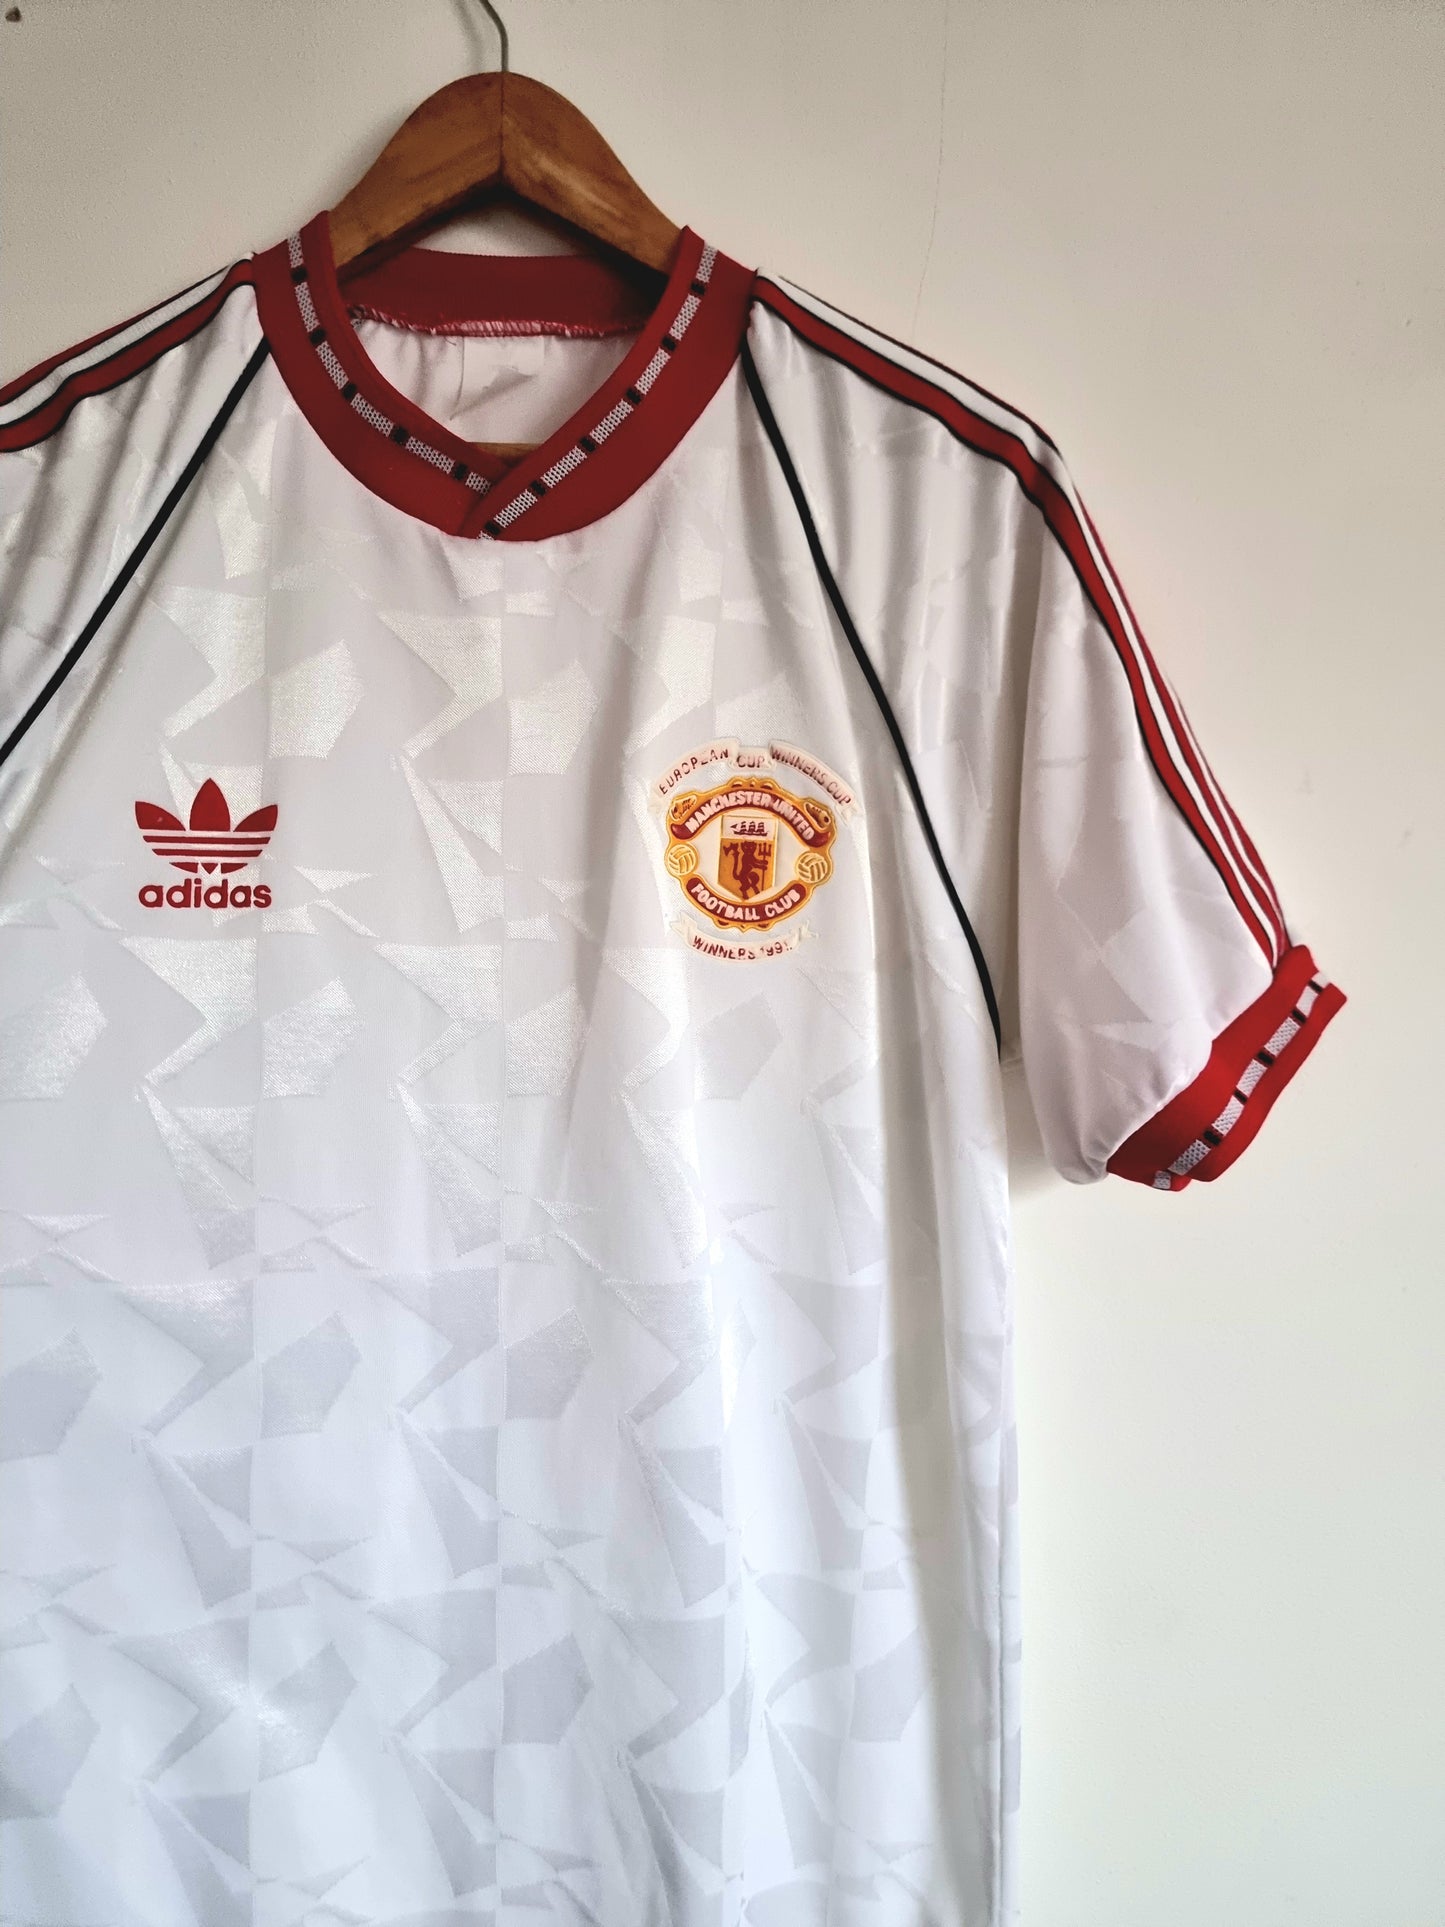 Adidas Manchester United 1991 European Cup Winners Cup Shirt Large